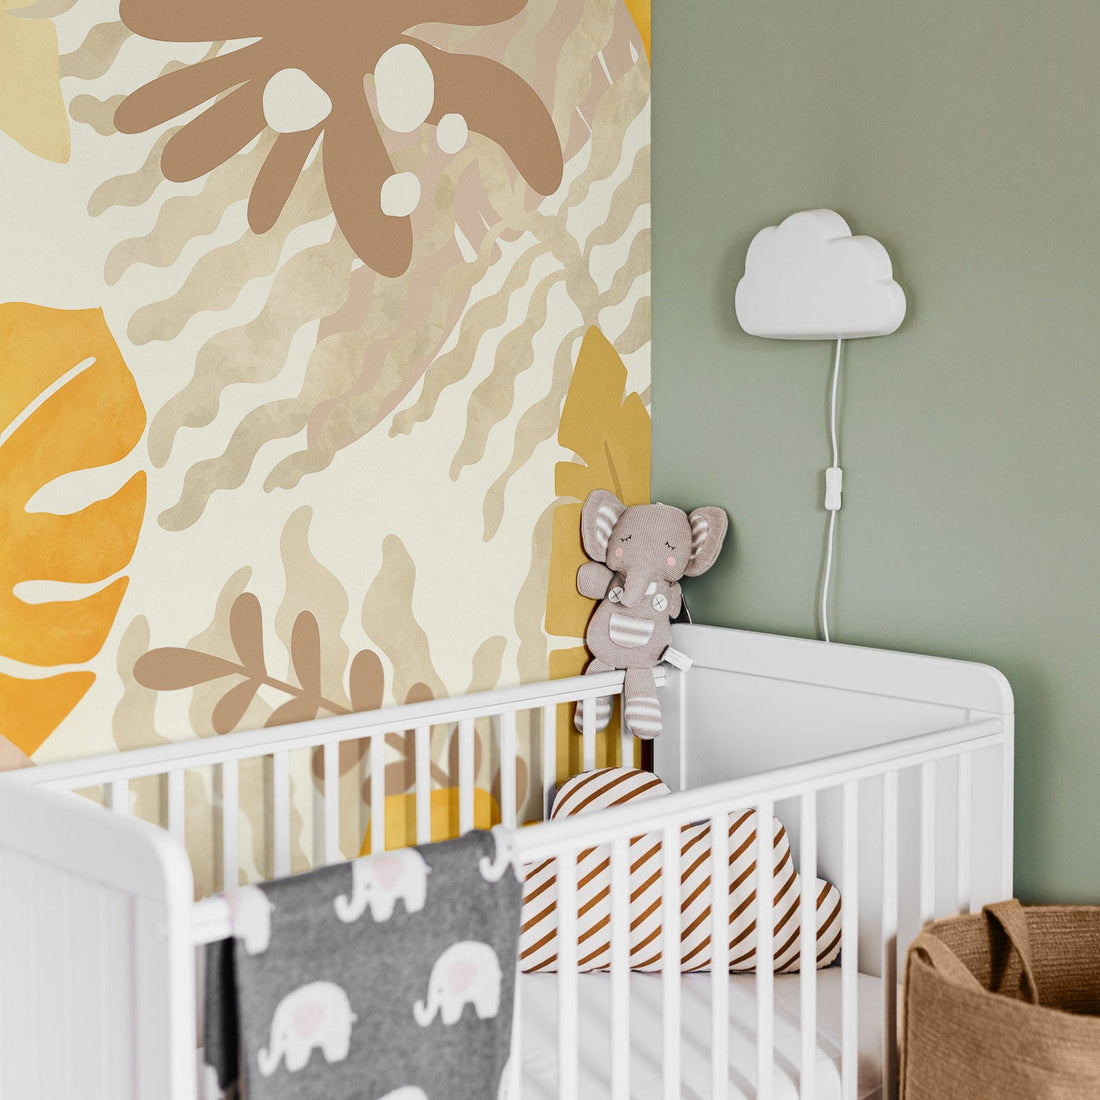 Jungle theme nursery interior with neutral tropical wall mural and safari animals decor and toys